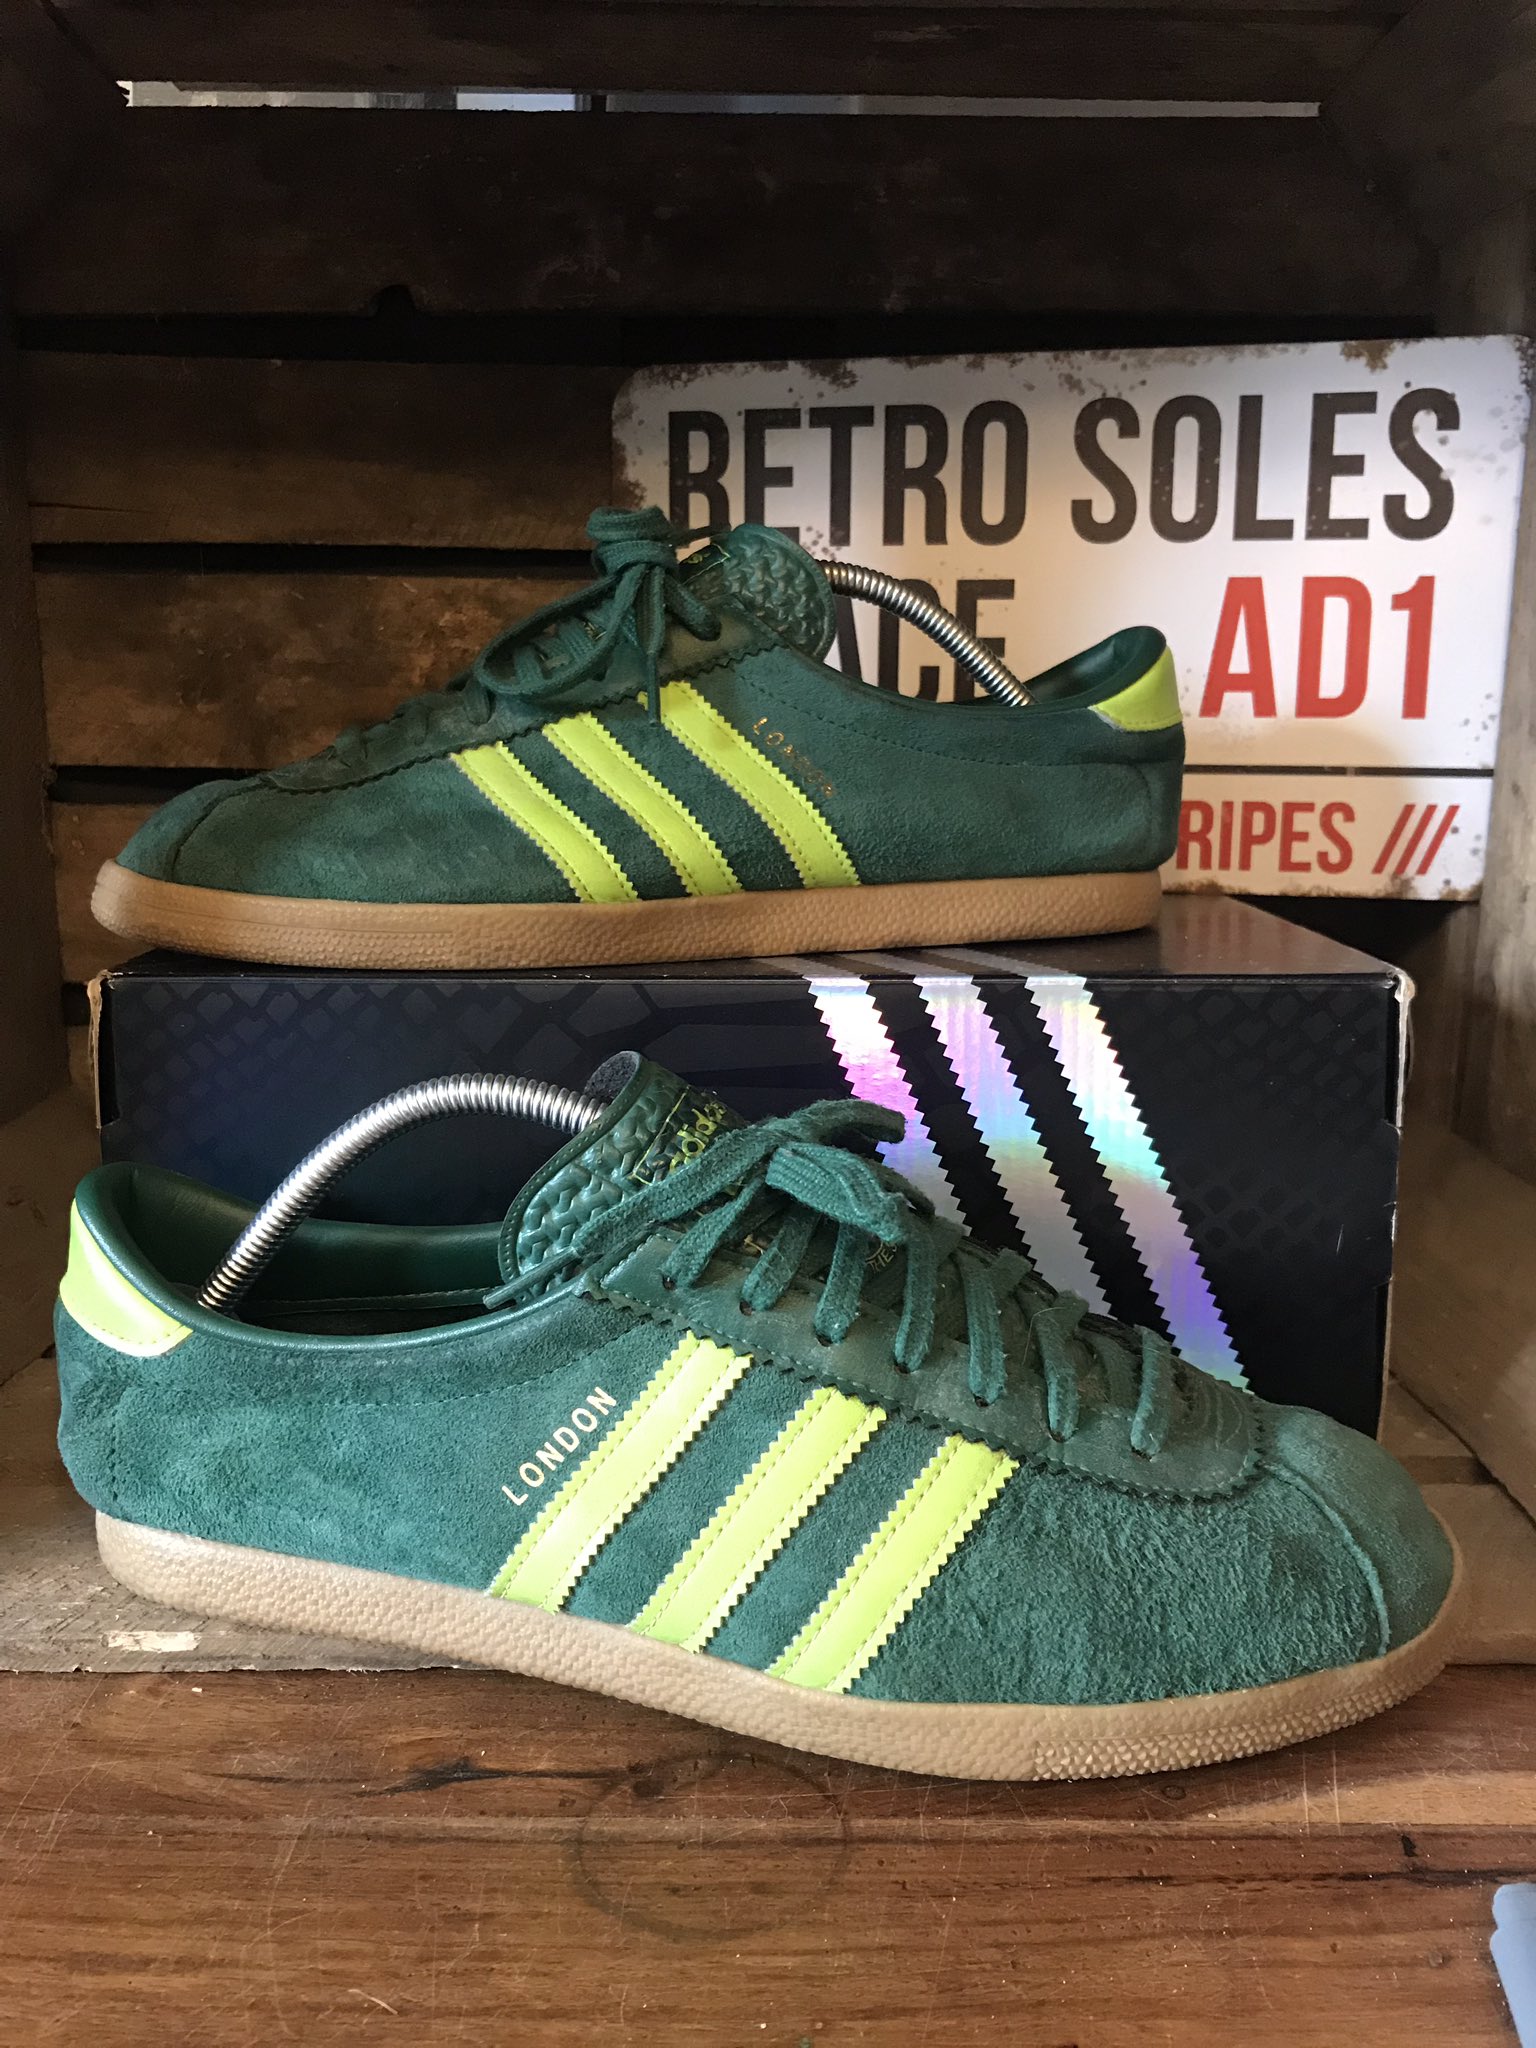 Retro Soles on Twitter: "These need bringing back to #adidas #london # slime https://t.co/LG8GlDdyfm" / Twitter